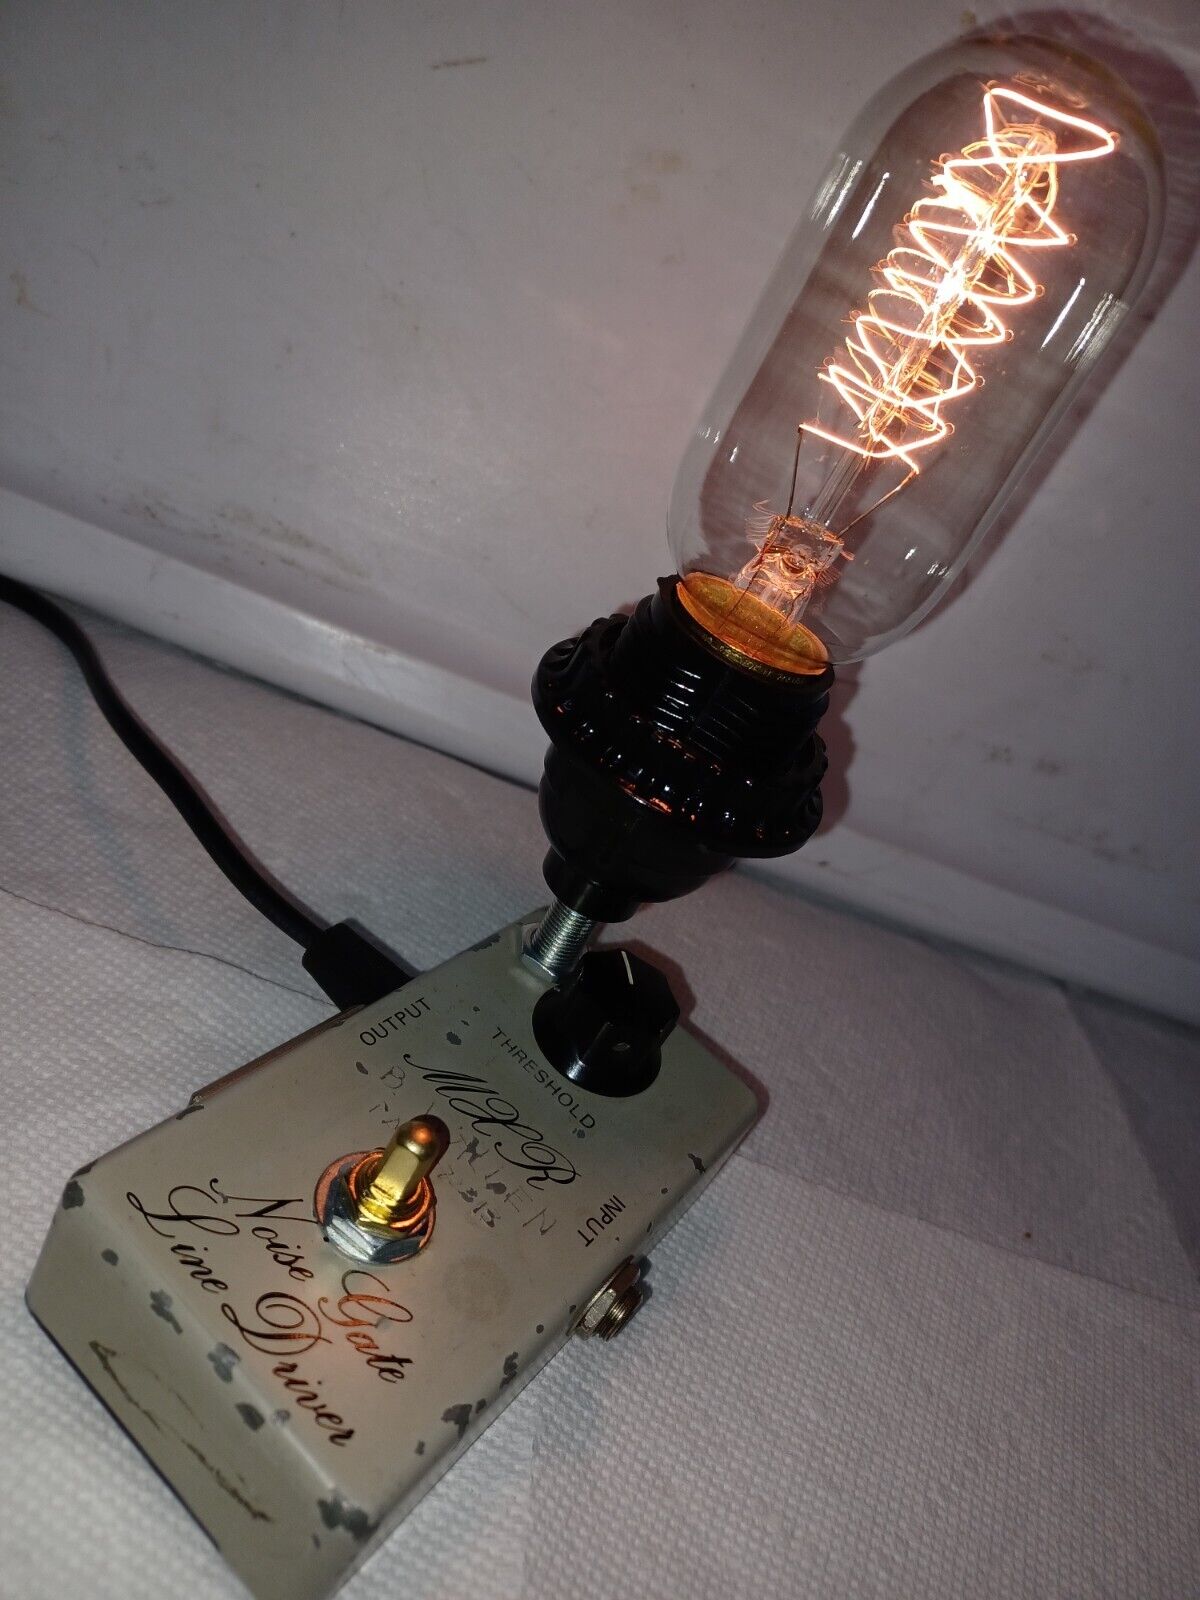 Lamp Made Out Of MXR Noise Gate Line Driver Guitar Effects Pedal